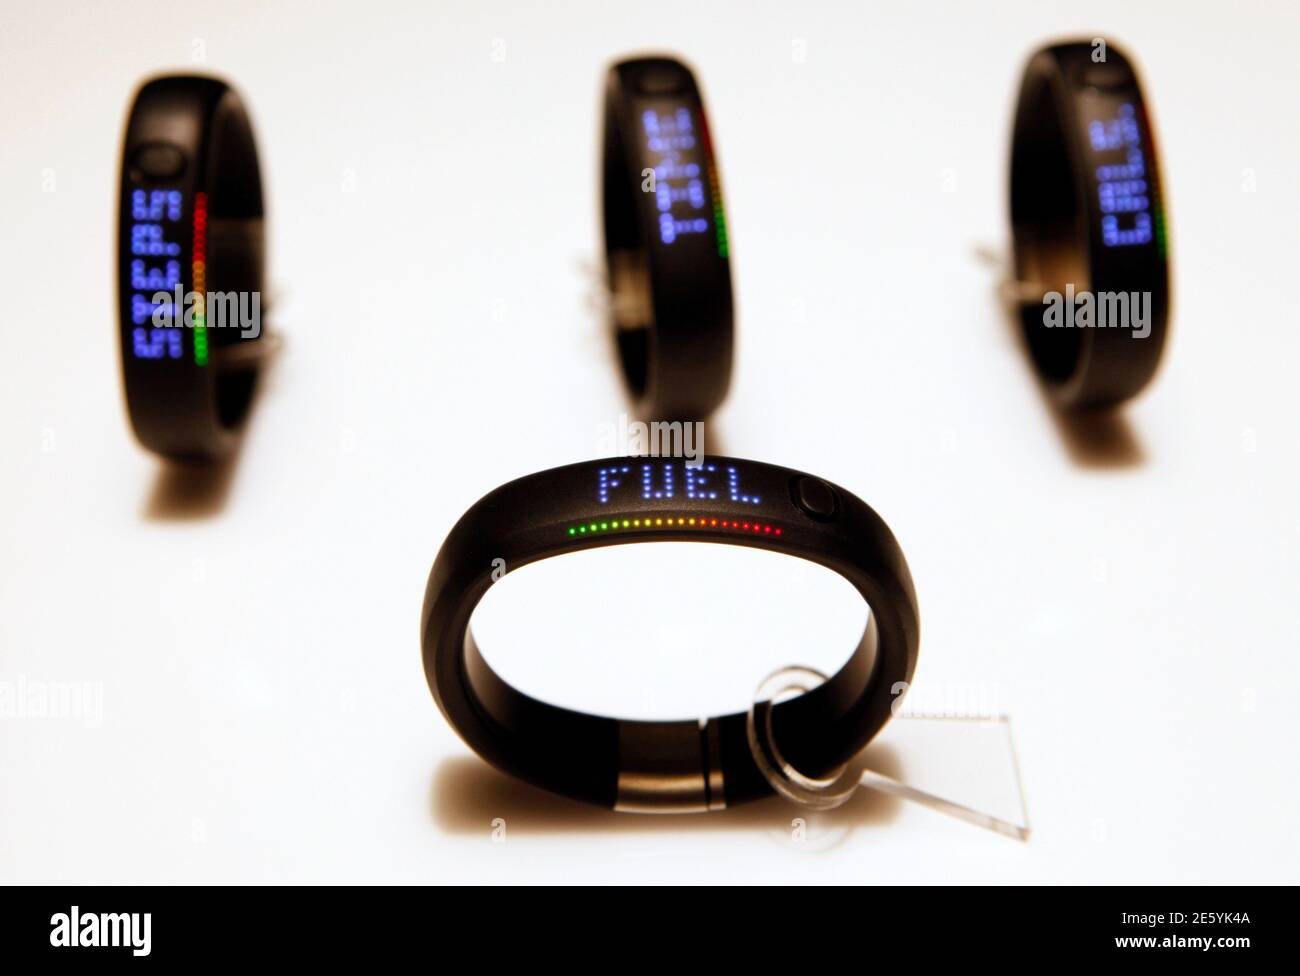 New NIKE+ FuelBands, an innovative wristband that tracks and measures  everyday movement, what Nike says, motivates and inspires people to be more  active, are seen on display in New York, January 19,